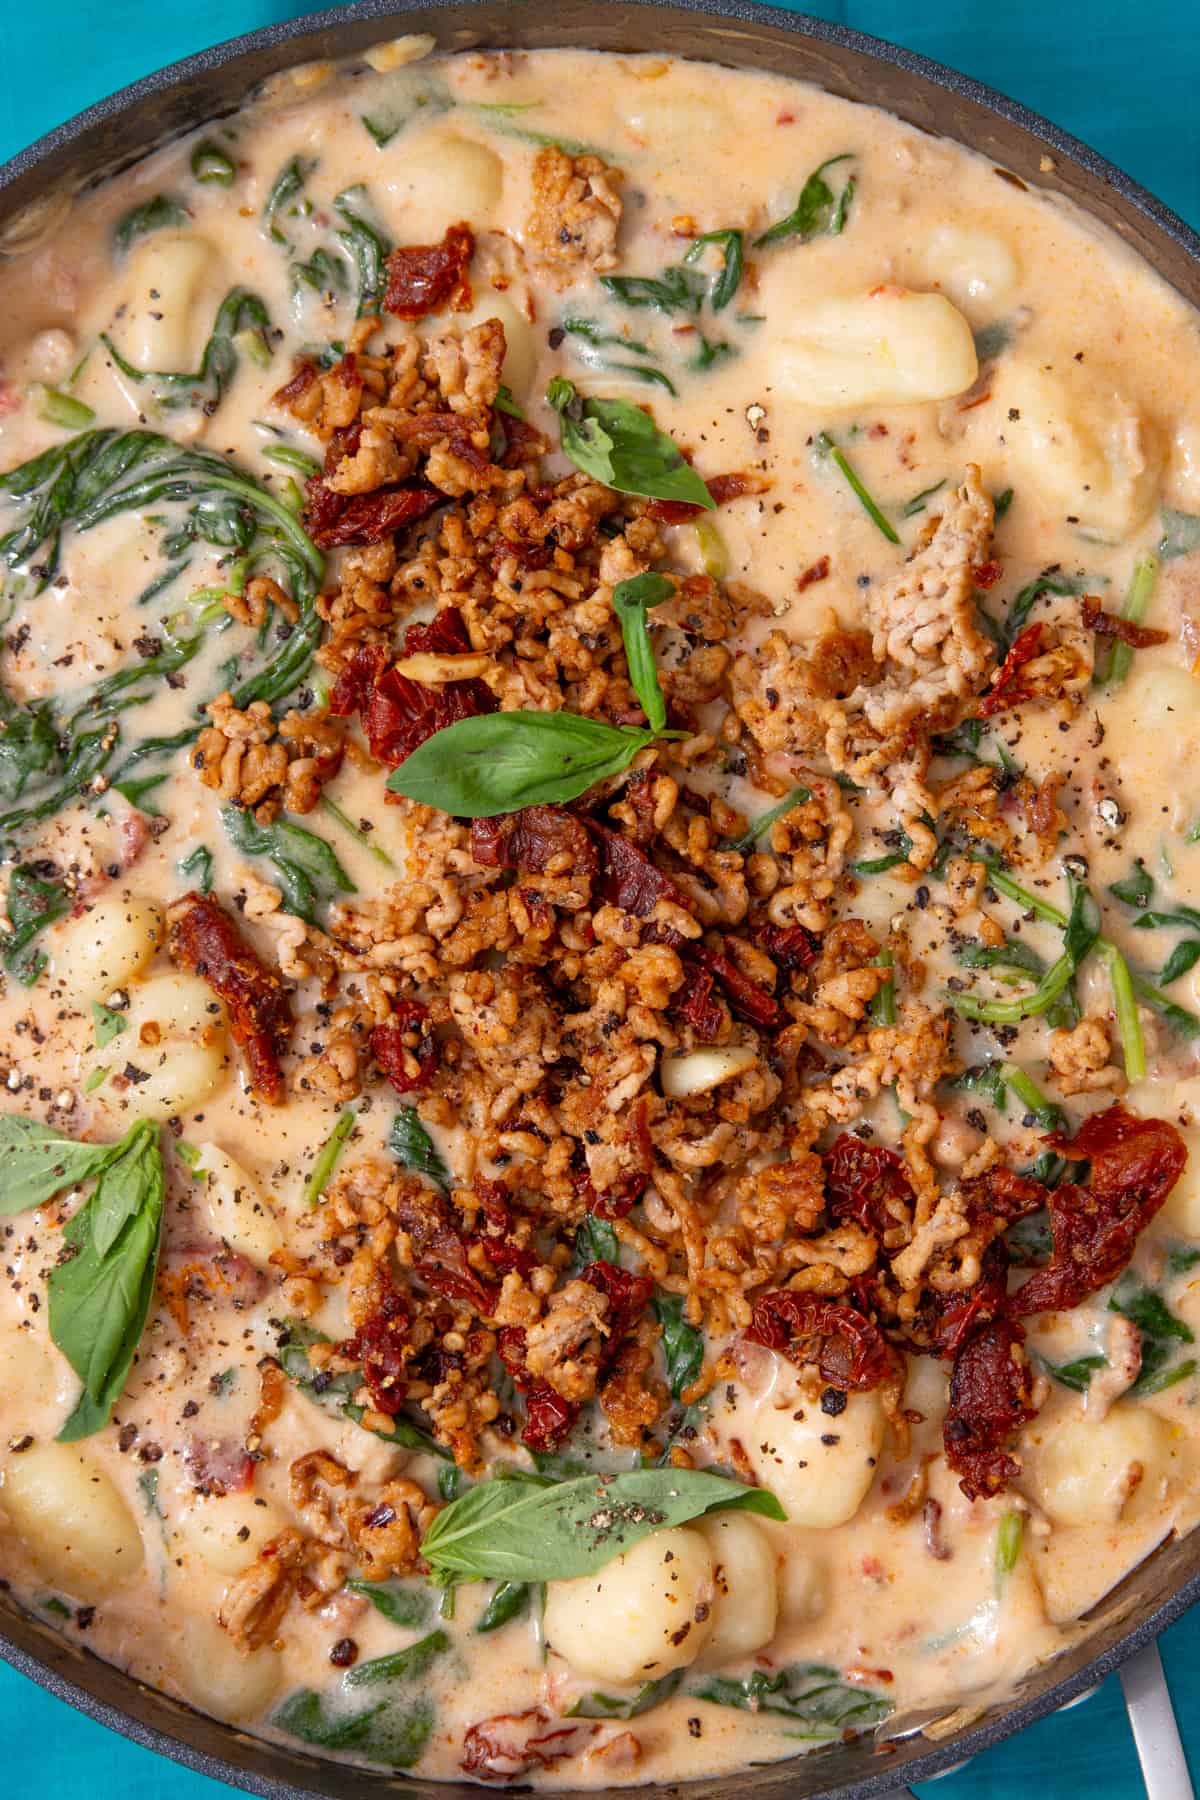 Gnocchi with a creamy sauce with pork mince, spinach and sun-dried tomatoes topped with basil and extra browned pork and sun-dried tomatoes.